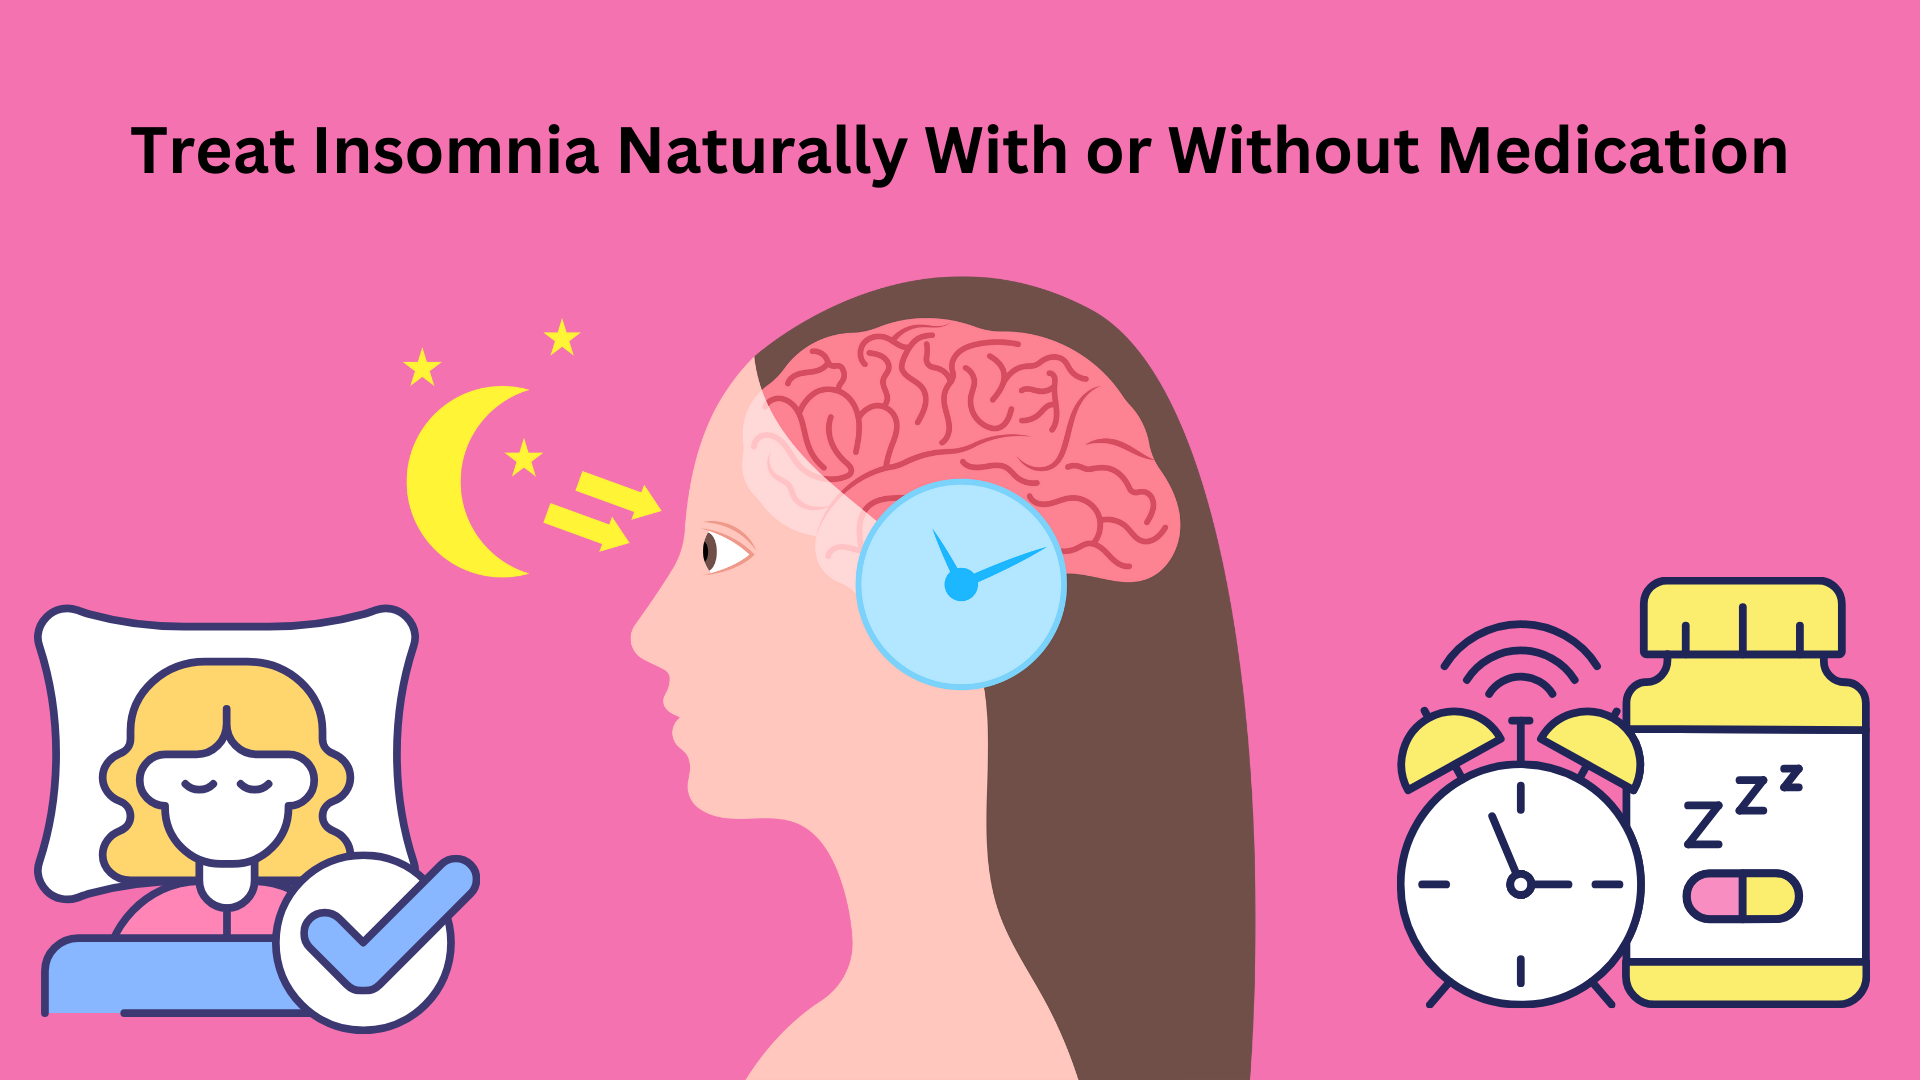 How to Treat Insomnia Naturally With or Without Medication? 14